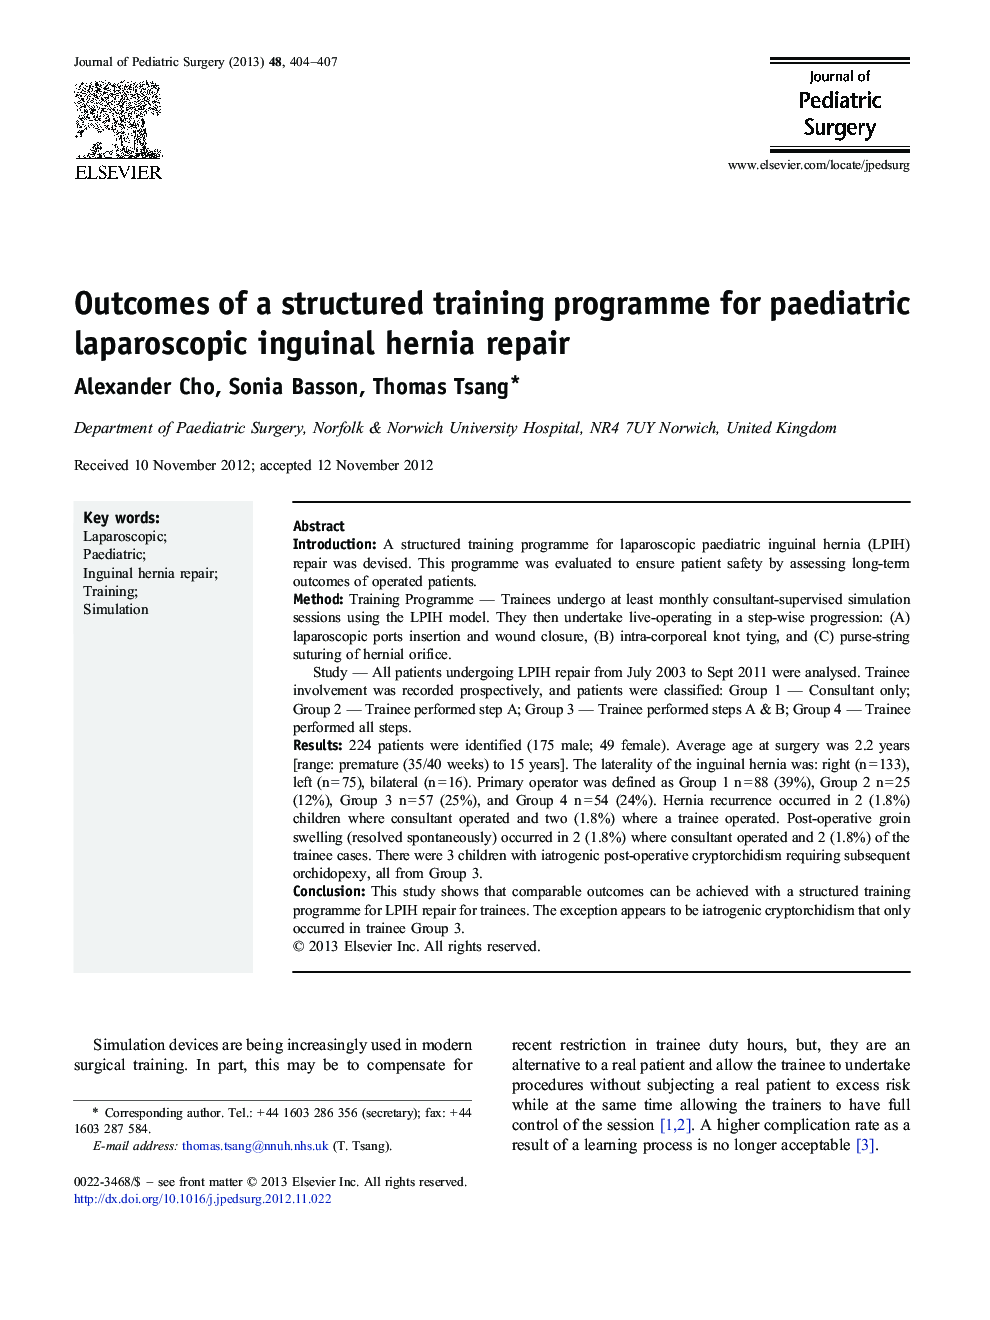 Outcomes of a structured training programme for paediatric laparoscopic inguinal hernia repair